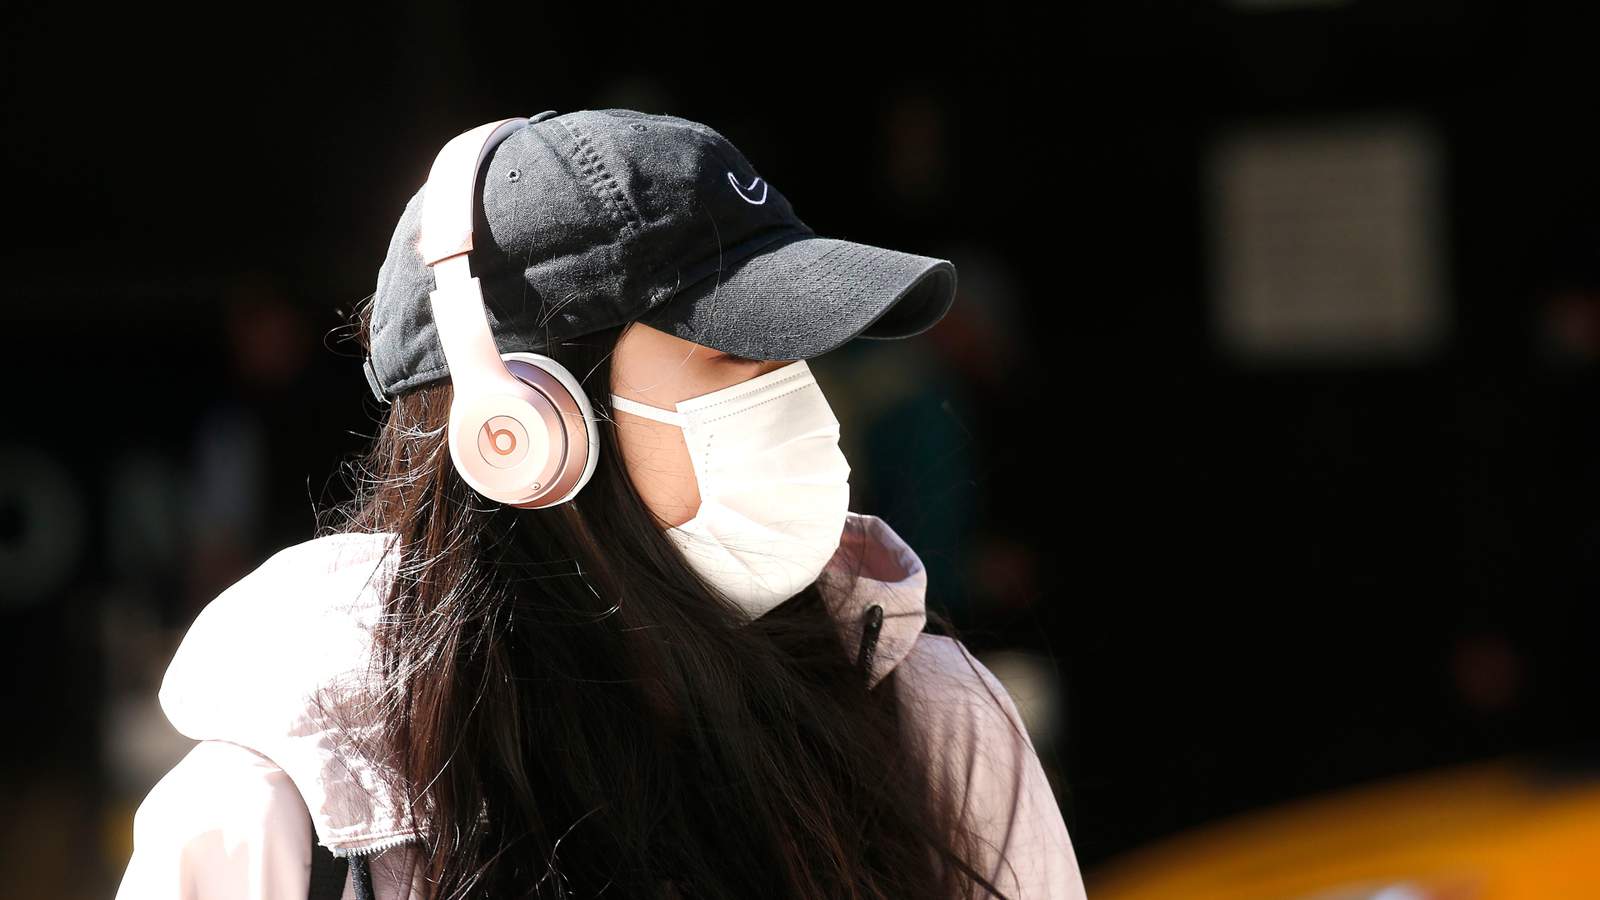 Top health officials may recommend masks be worn in public